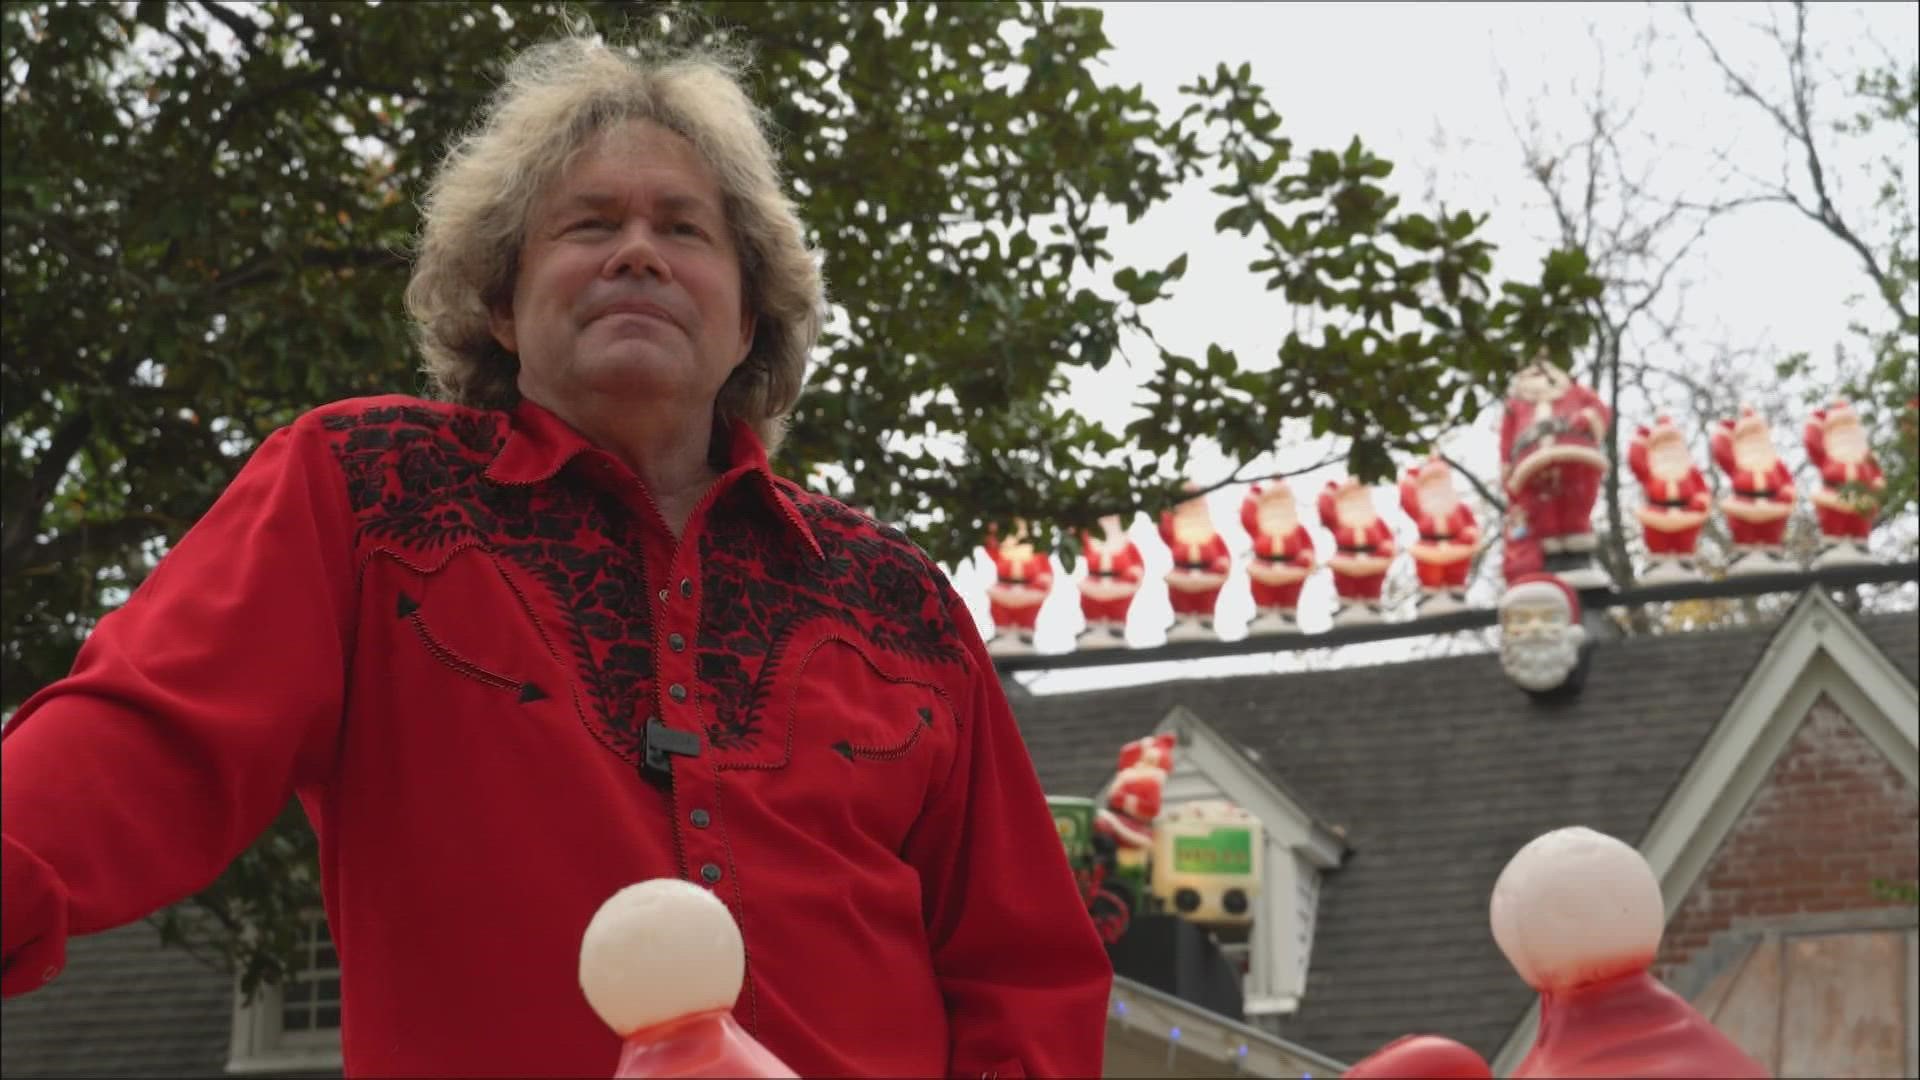 Wayne Smith is setting up Christmas decorations slower than normal after suffering a stroke. He's determined to get hundreds of Santa displays up  before Christmas.